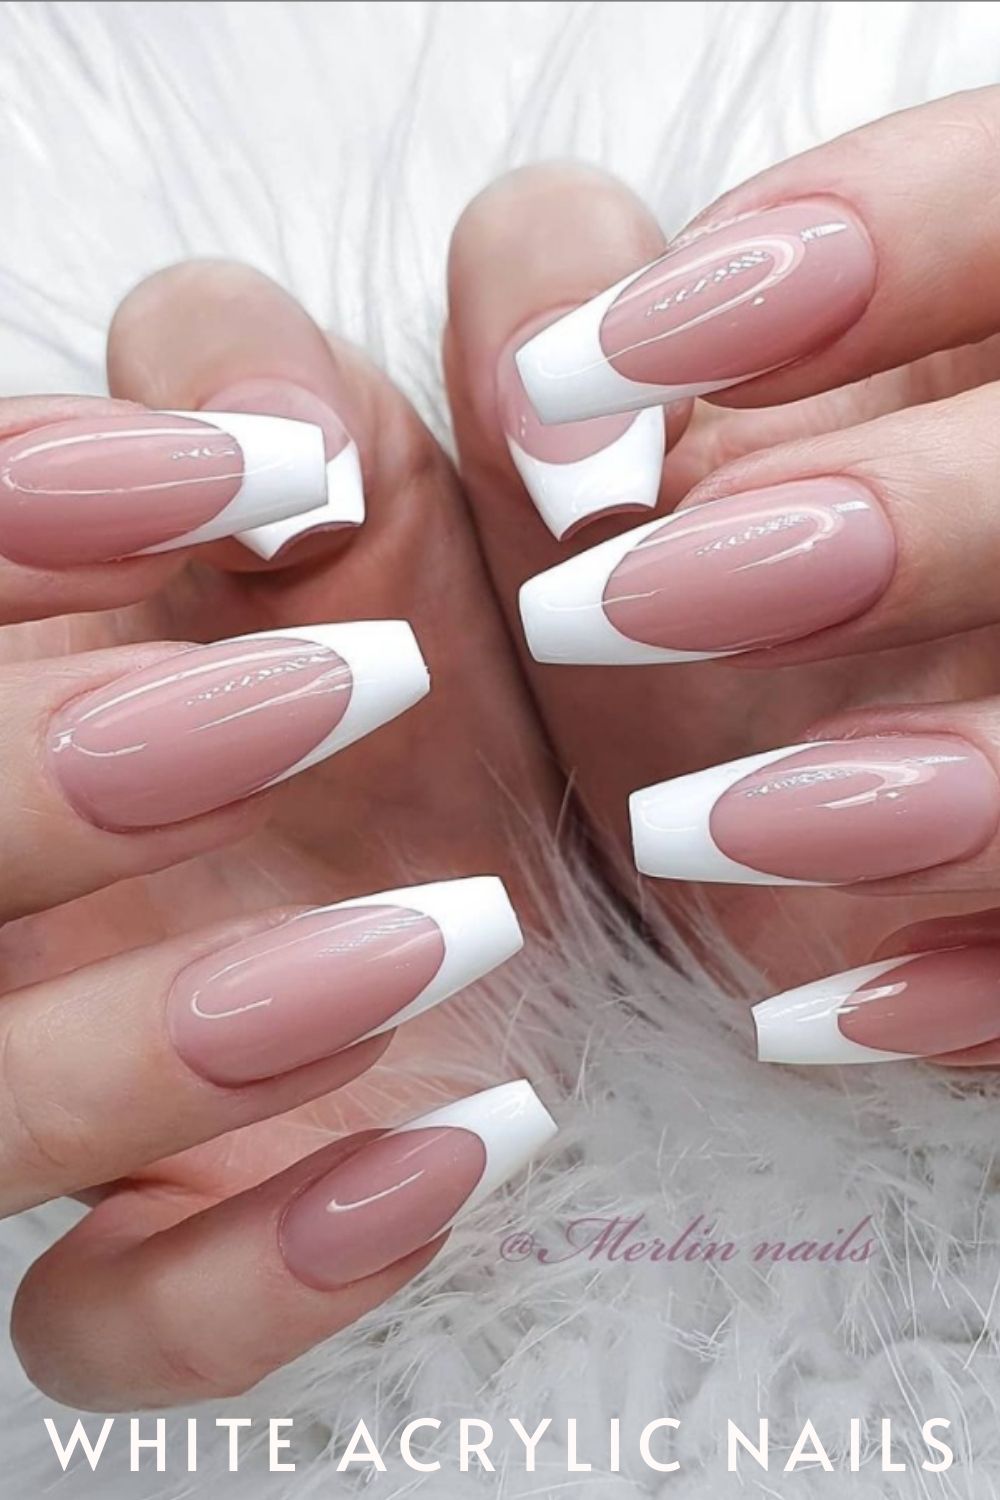 French tip coffin style nails